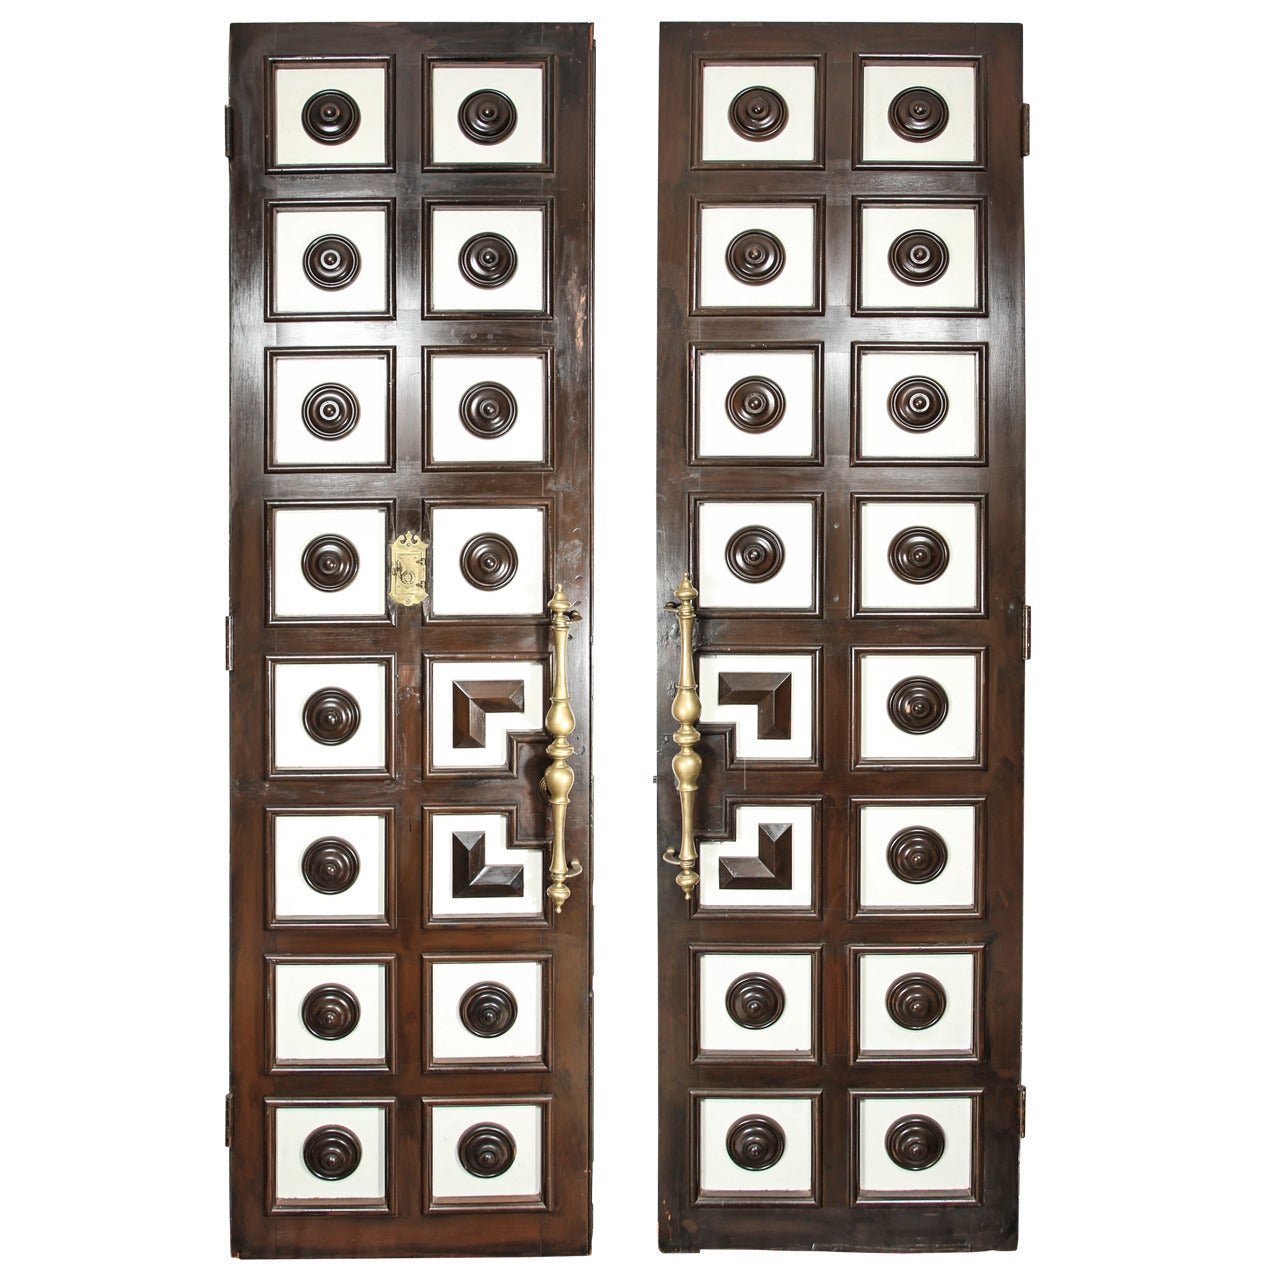 1930s Hollywood Regency Double-faced Coffered Doors